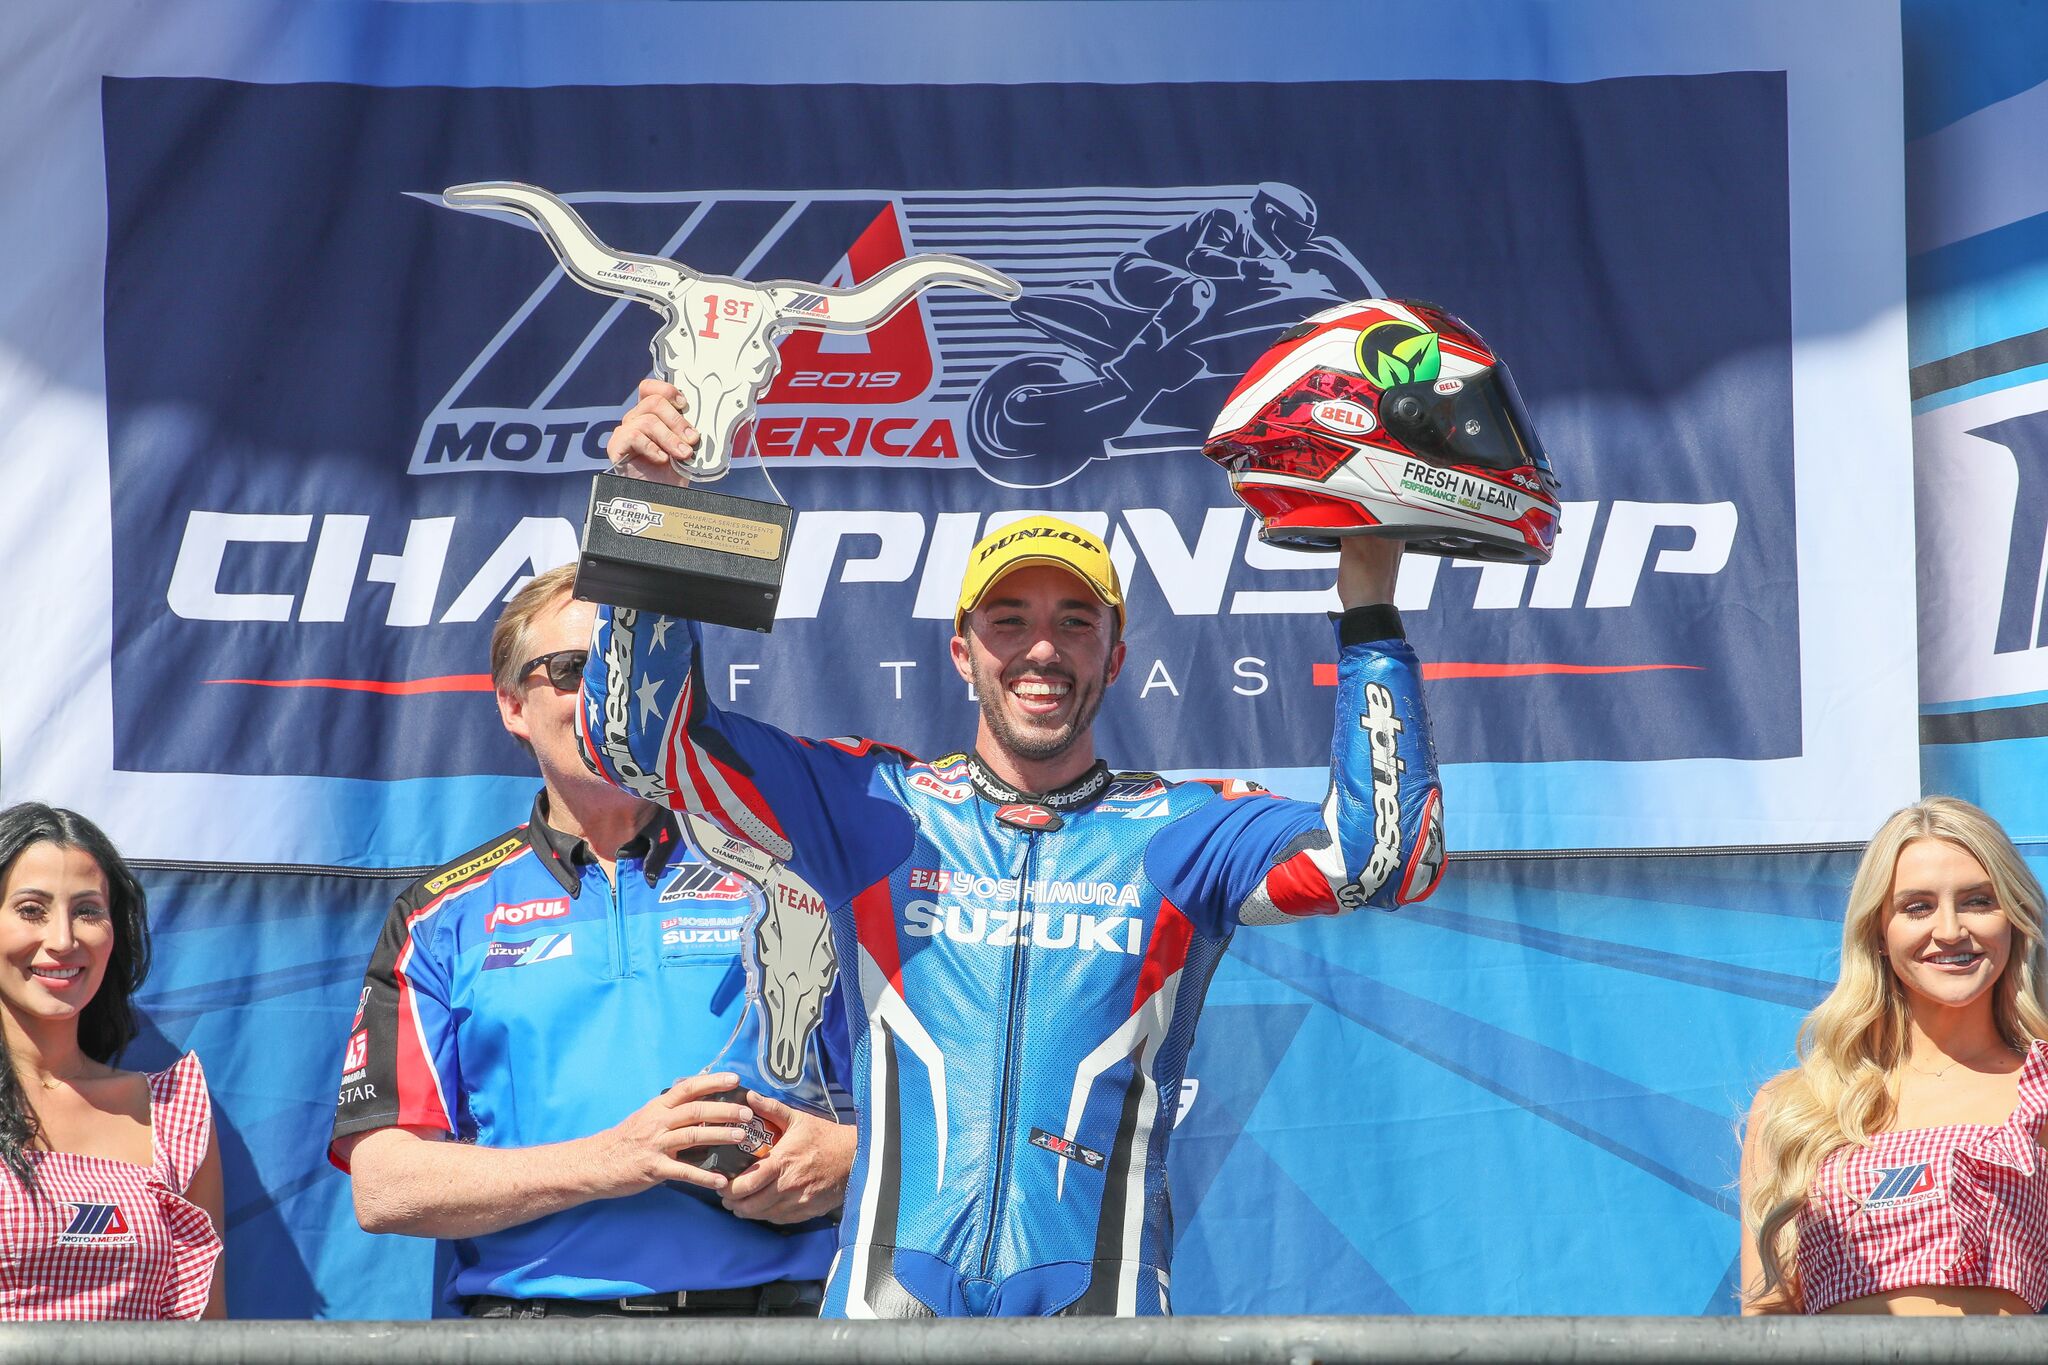 Herrin won the seventh Superbike race of his career and his first for Suzuki on Sunday at COTA